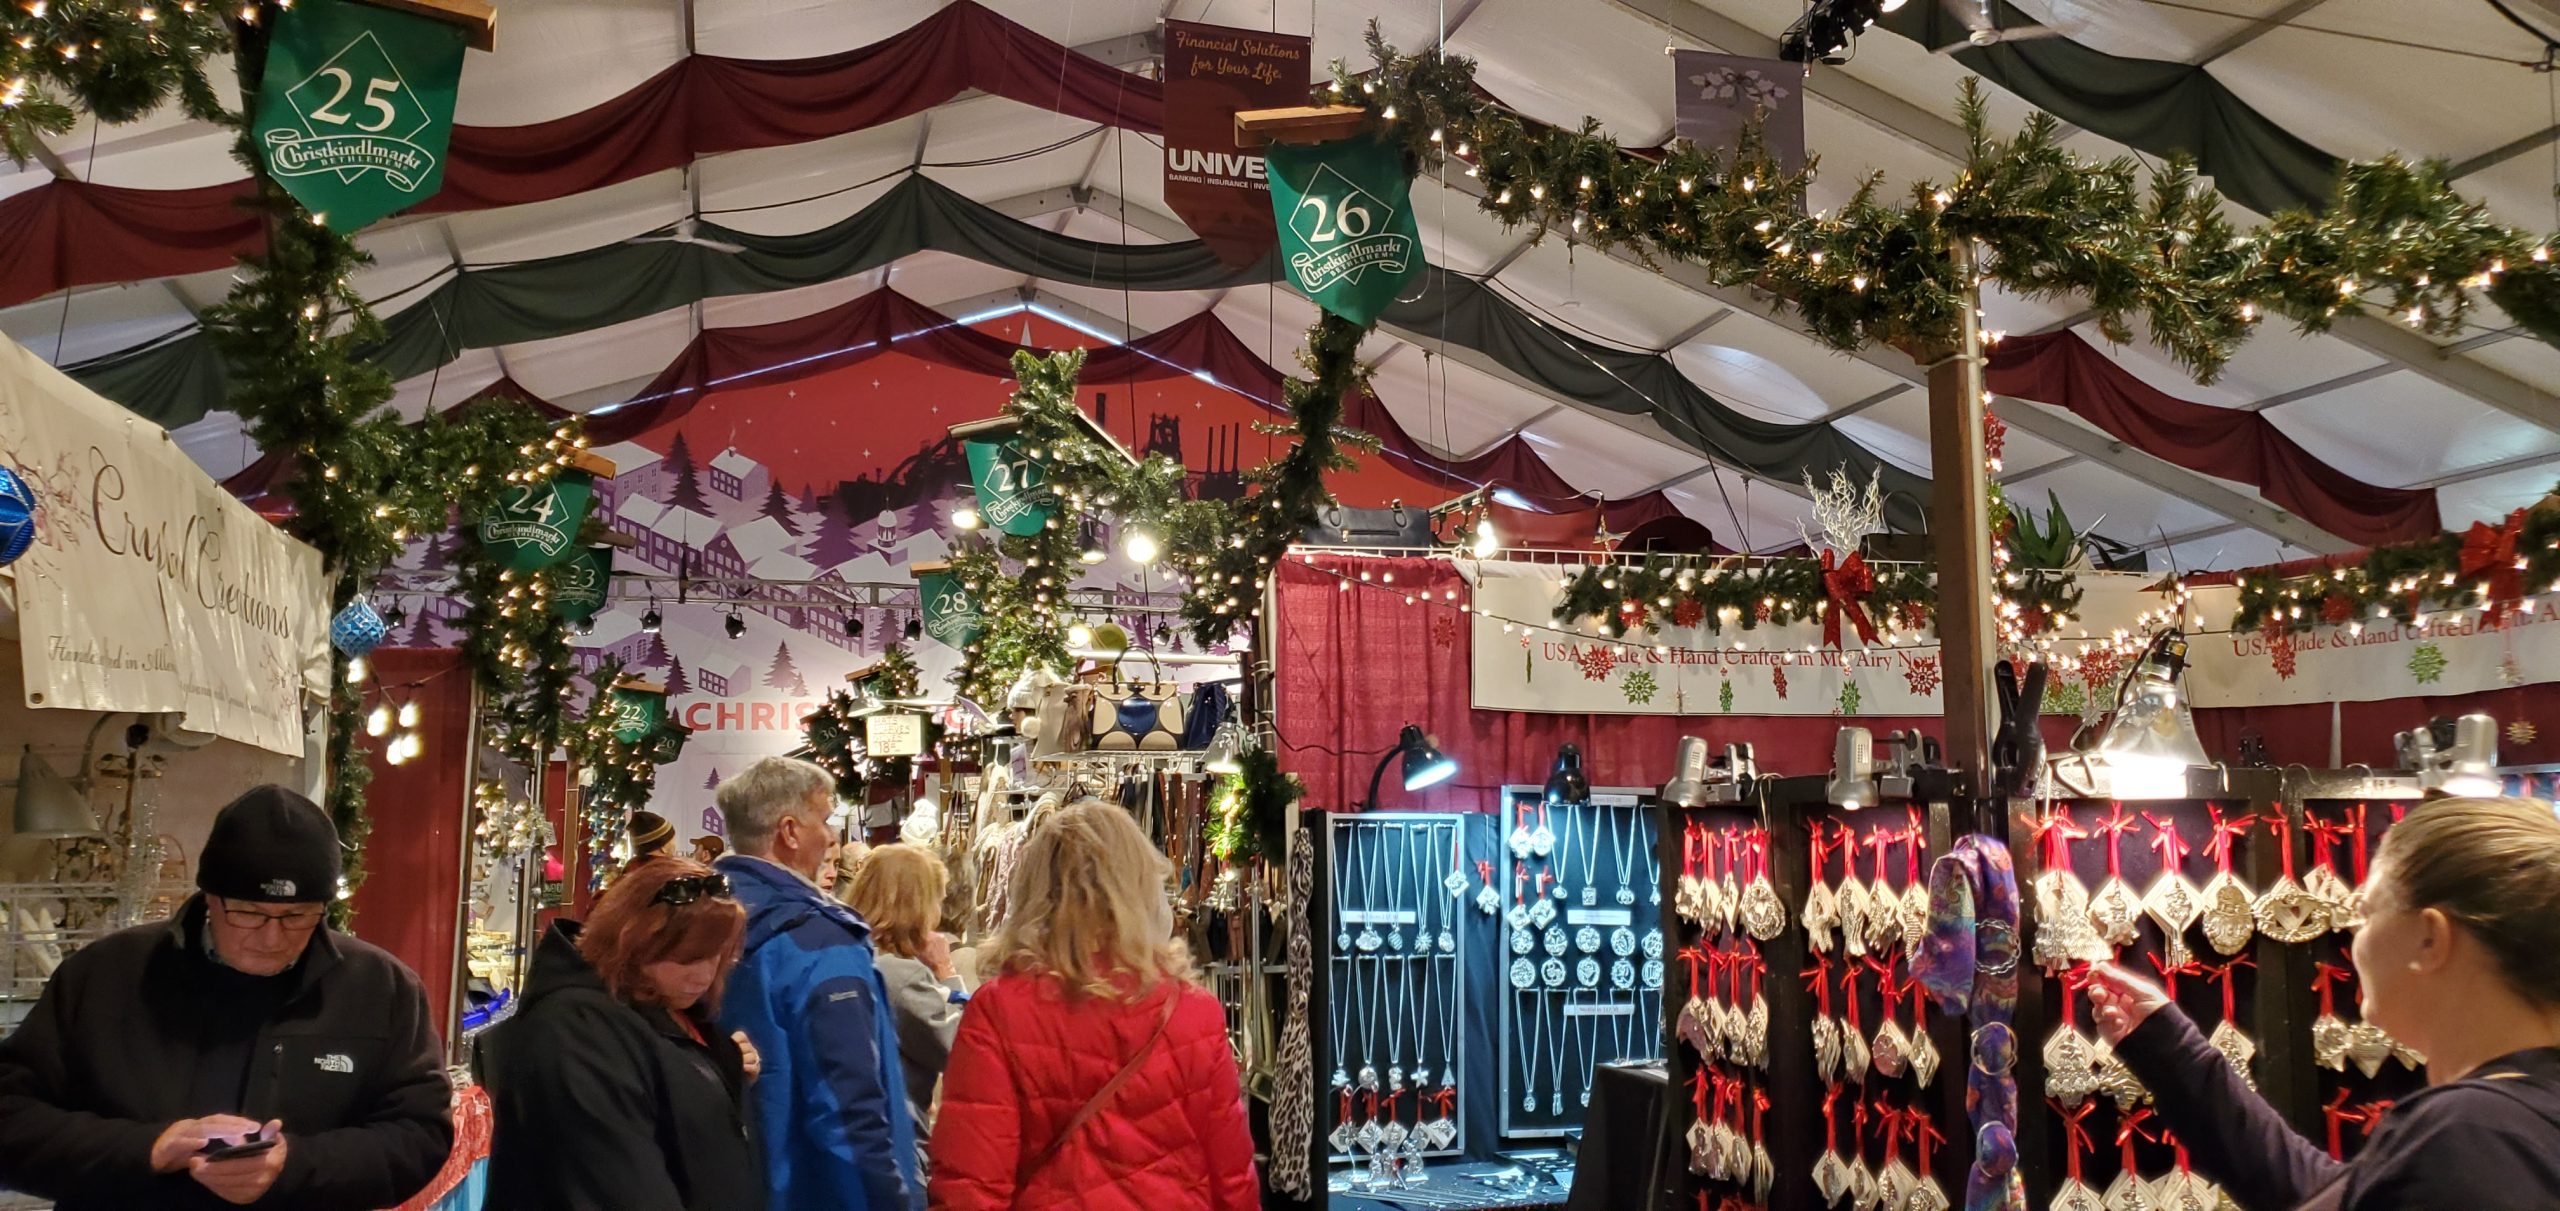 Why Christkindlmarkt is One of the Best Holiday Markets in the U.S